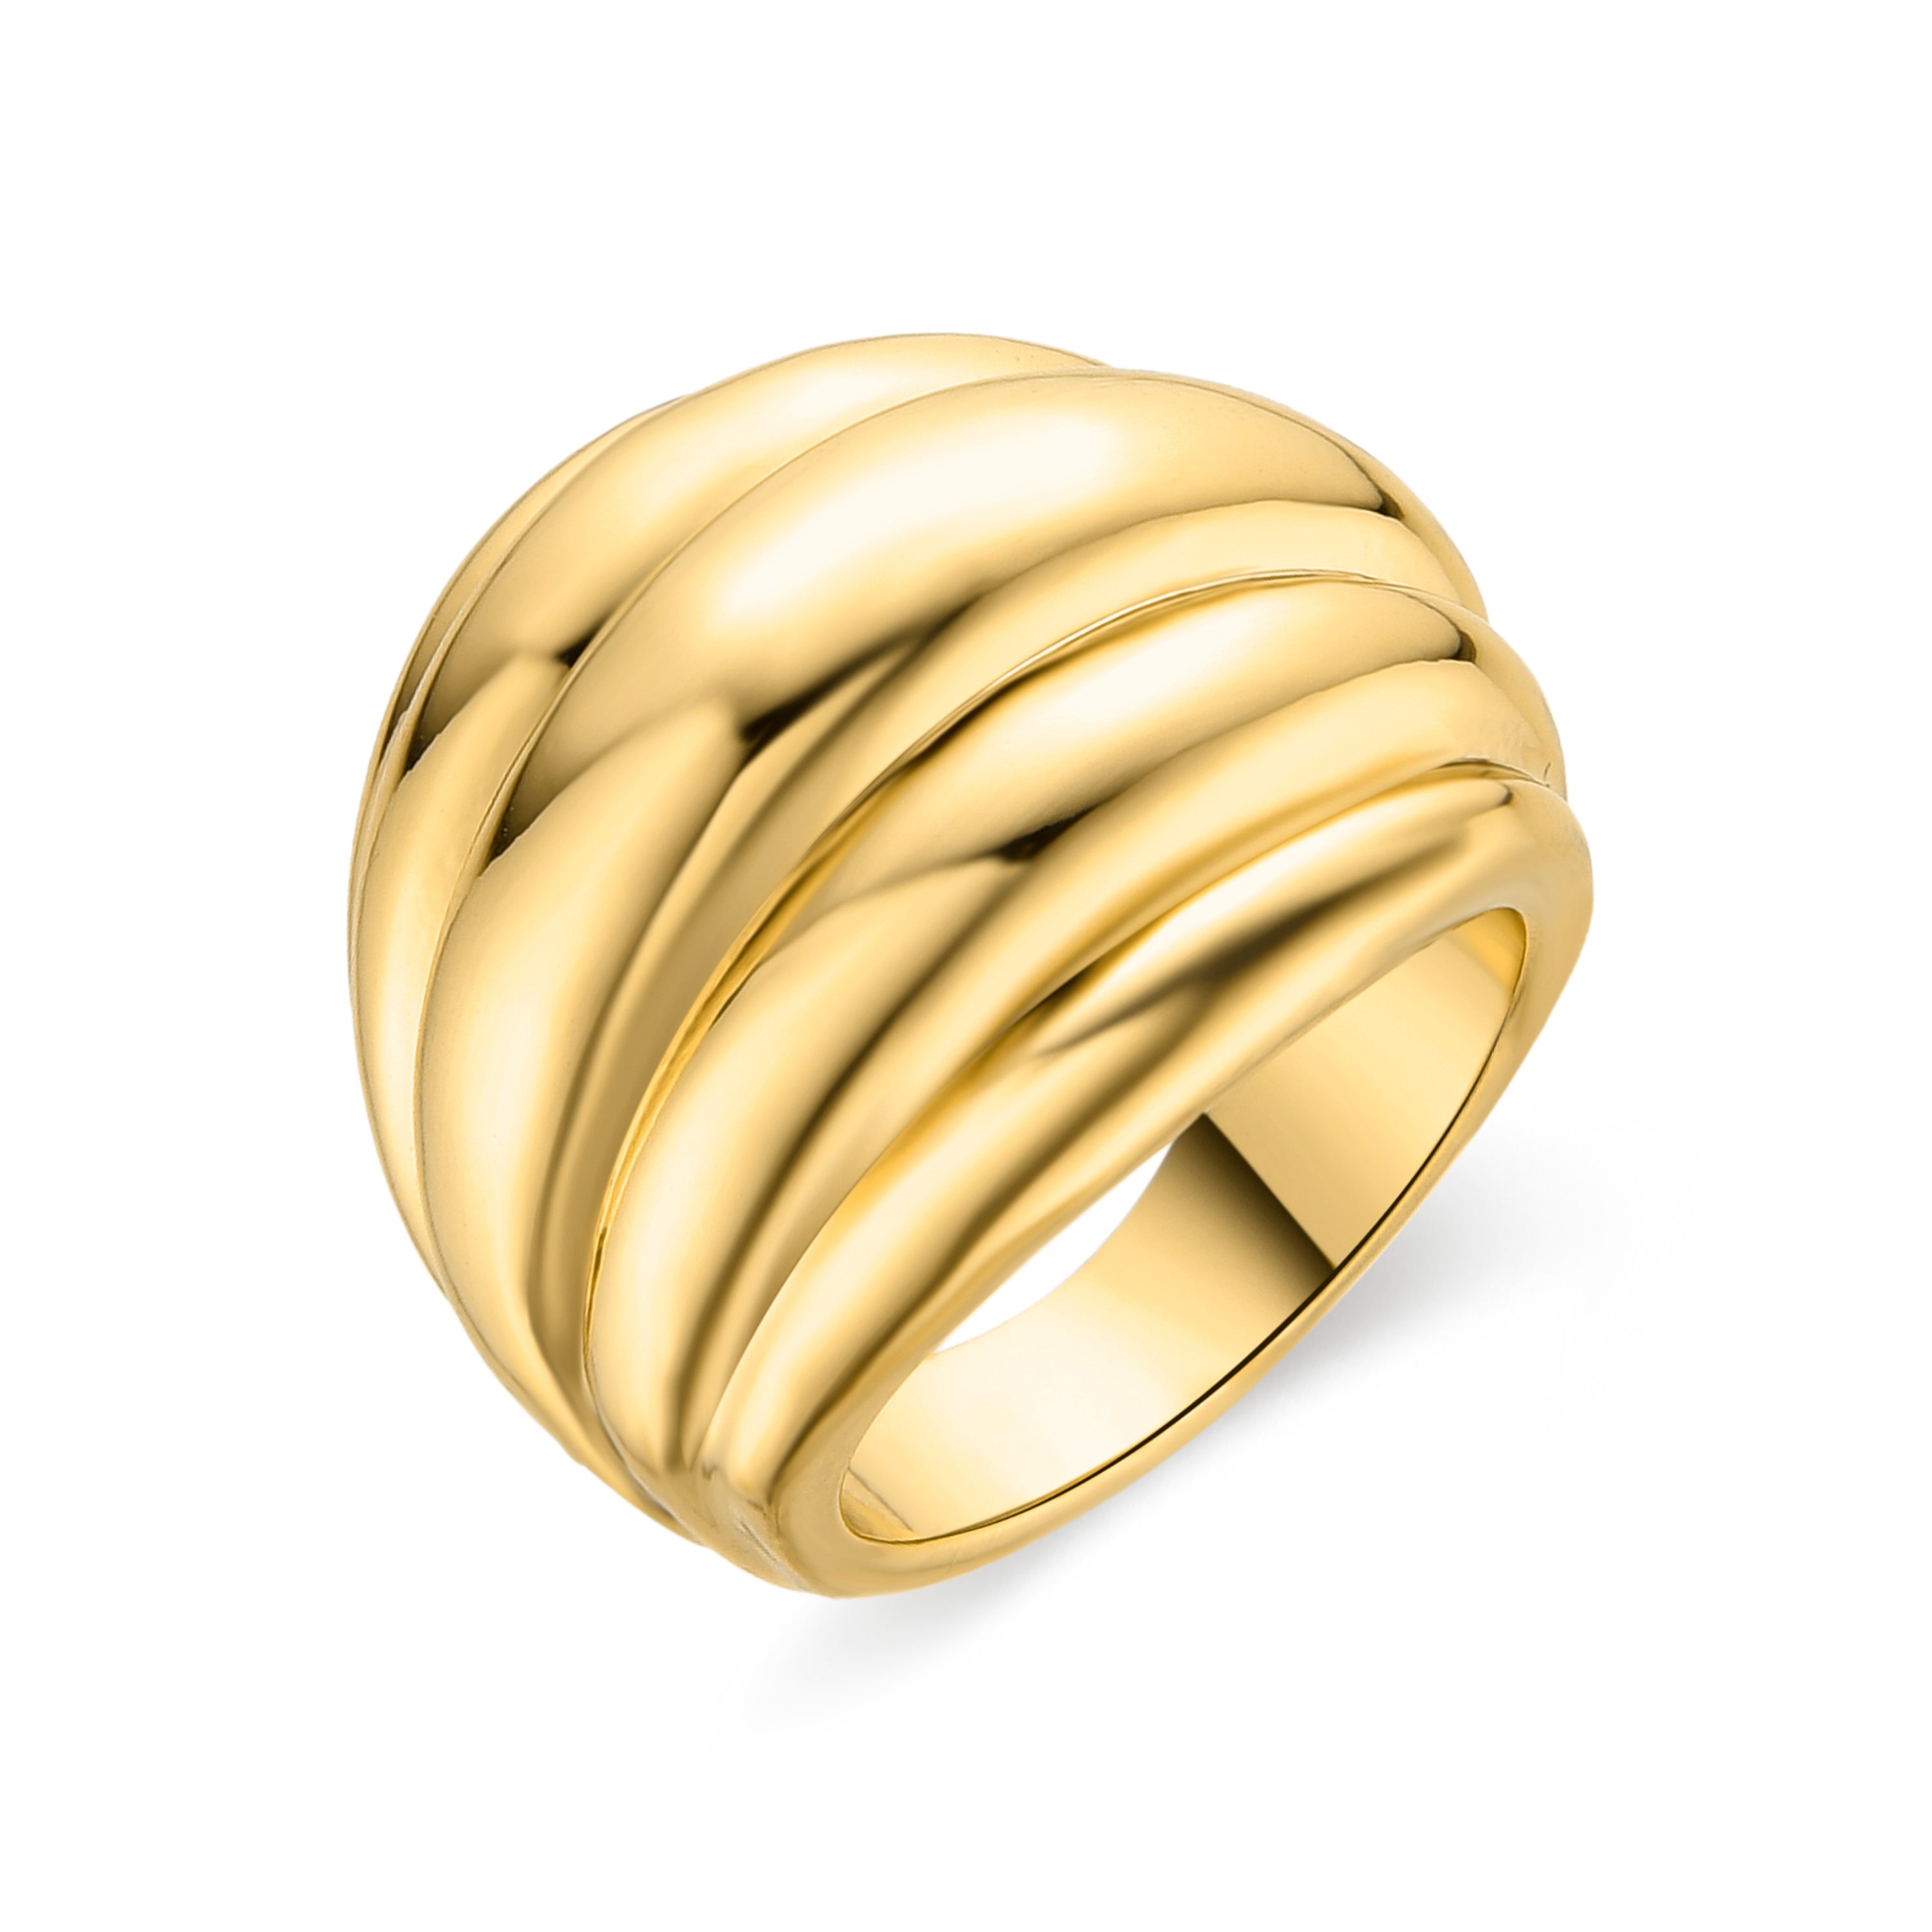 Abalt ring finished in 18k yellow gold